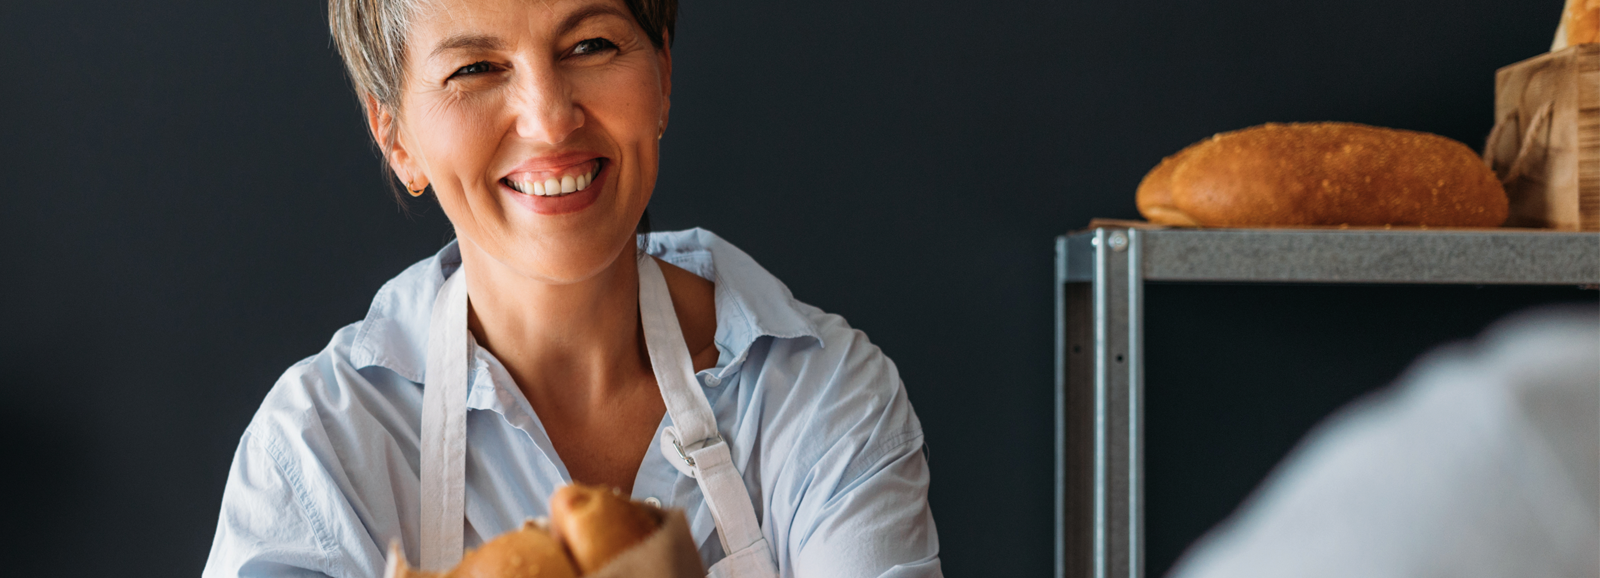 woman-selling-bread-1600x578.png